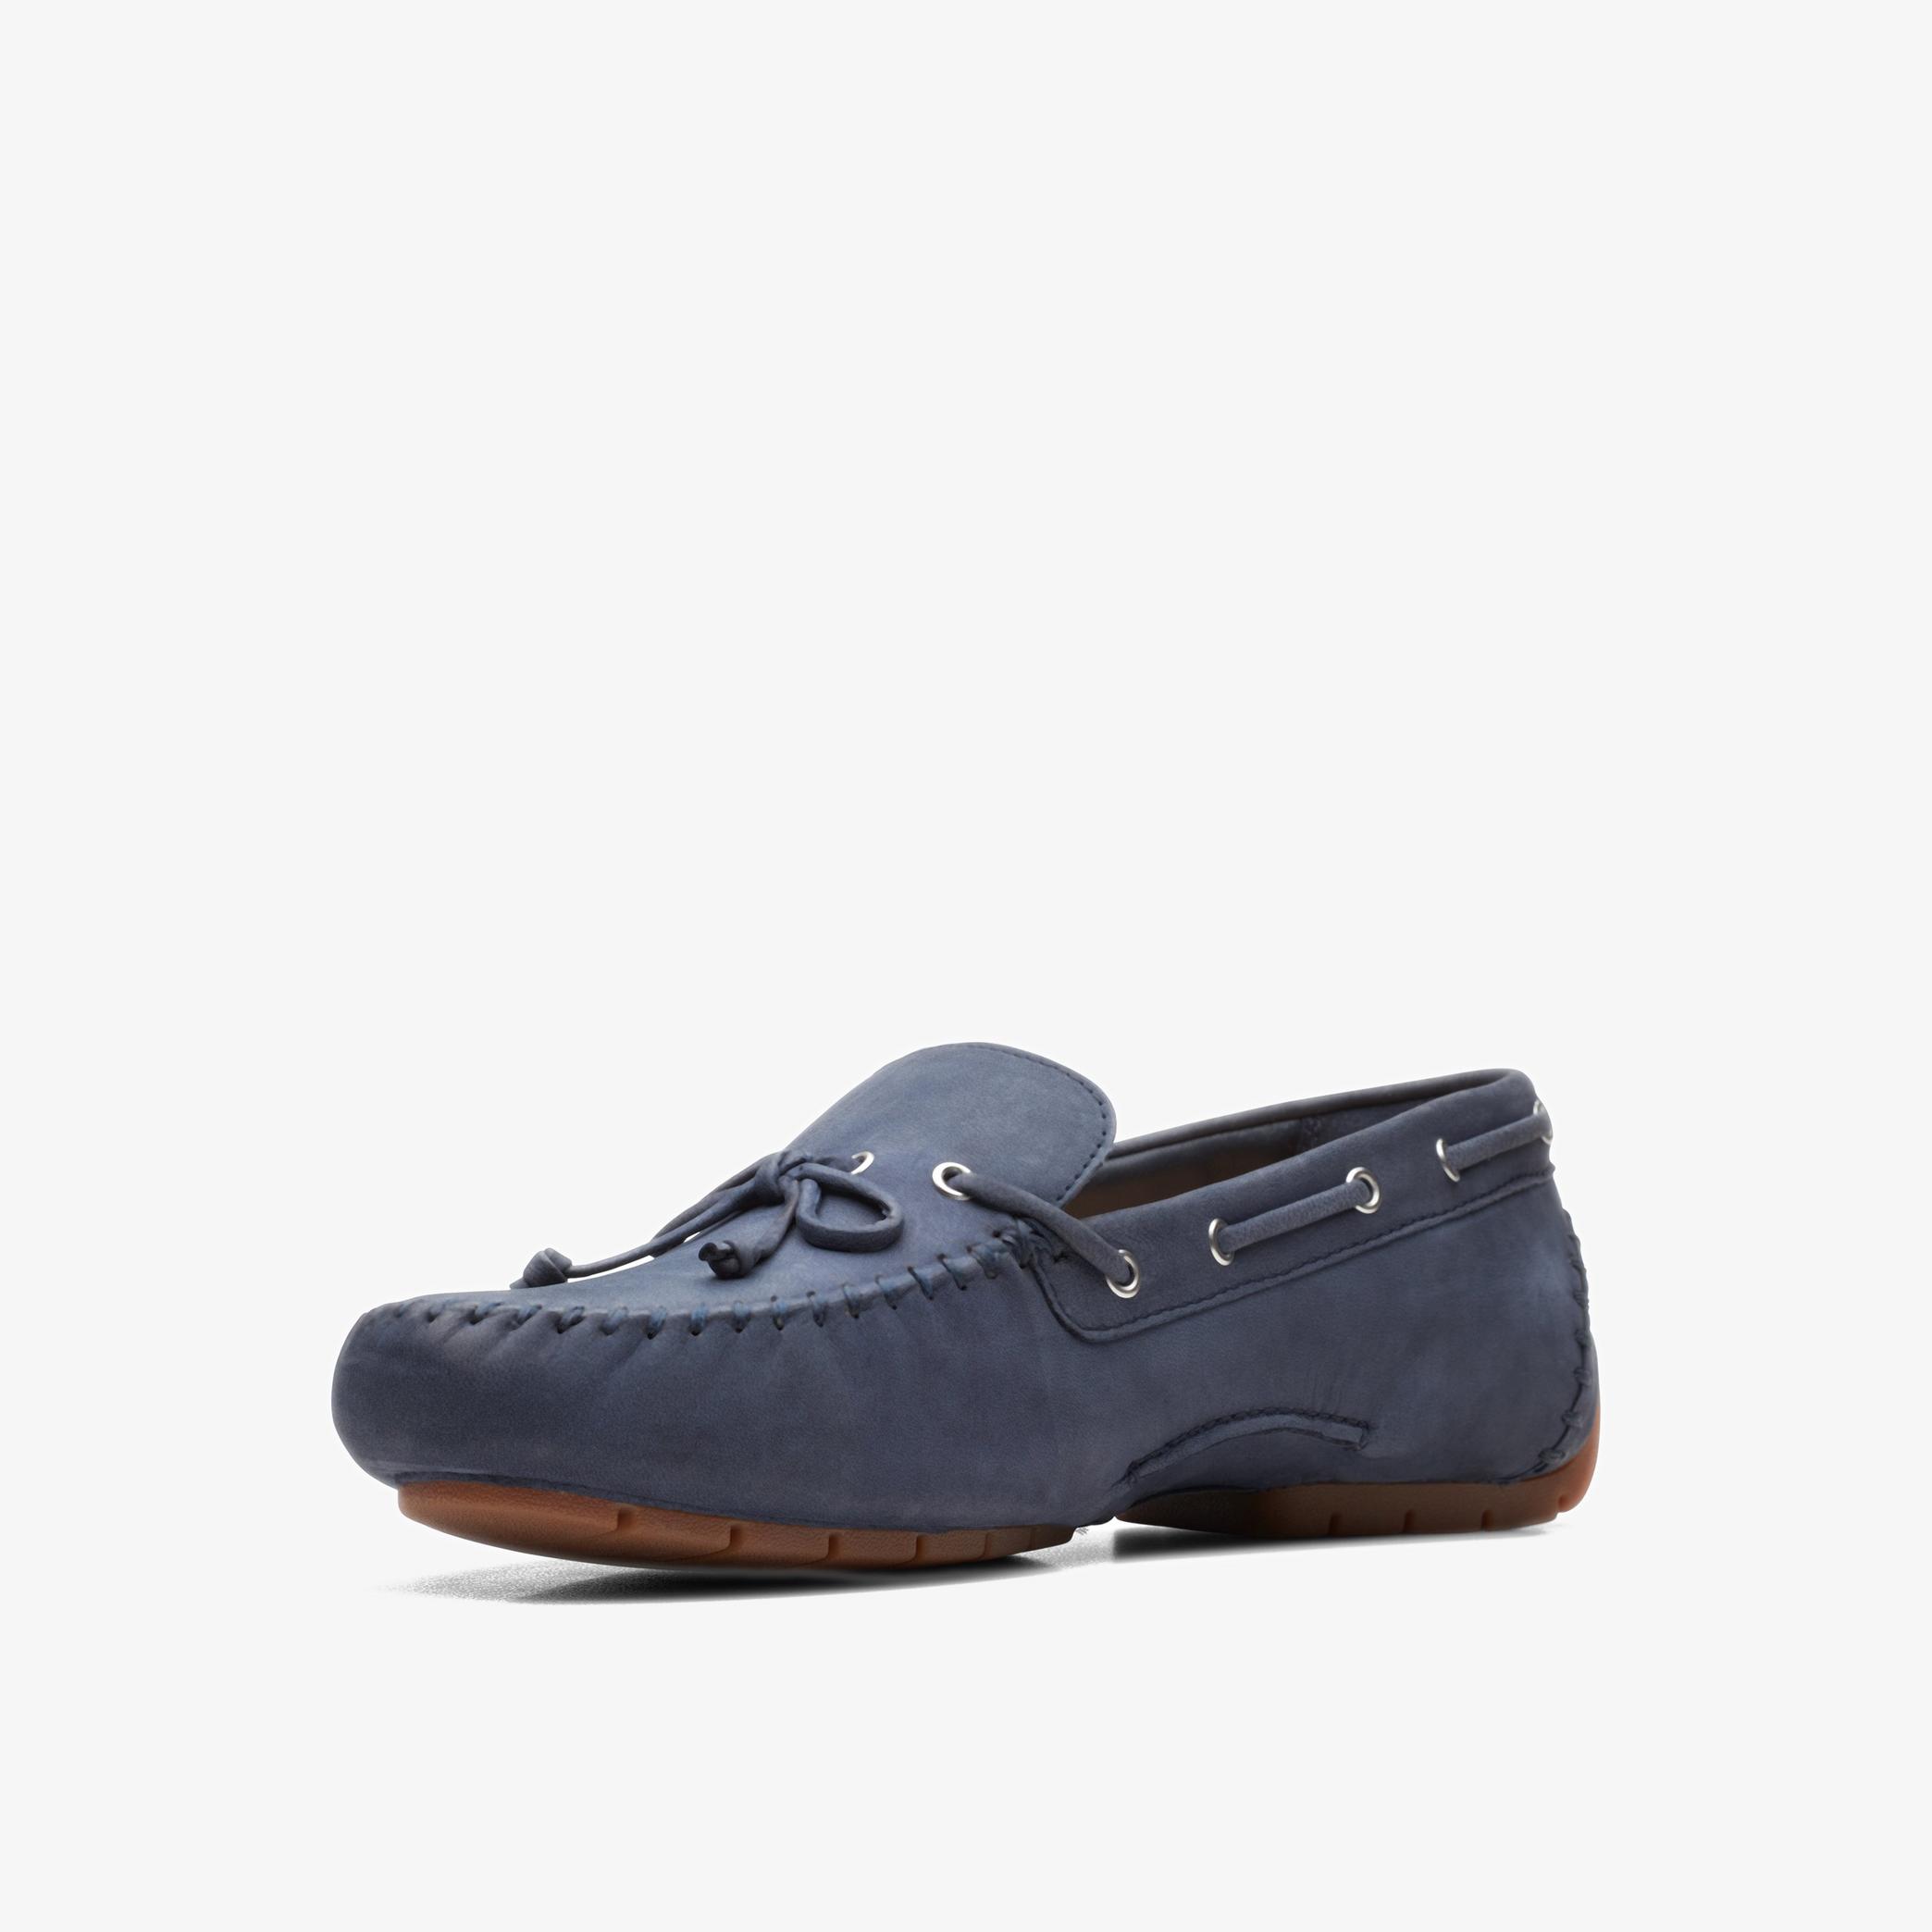 C Mocc Tie Navy Nubuck Loafers, view 4 of 6